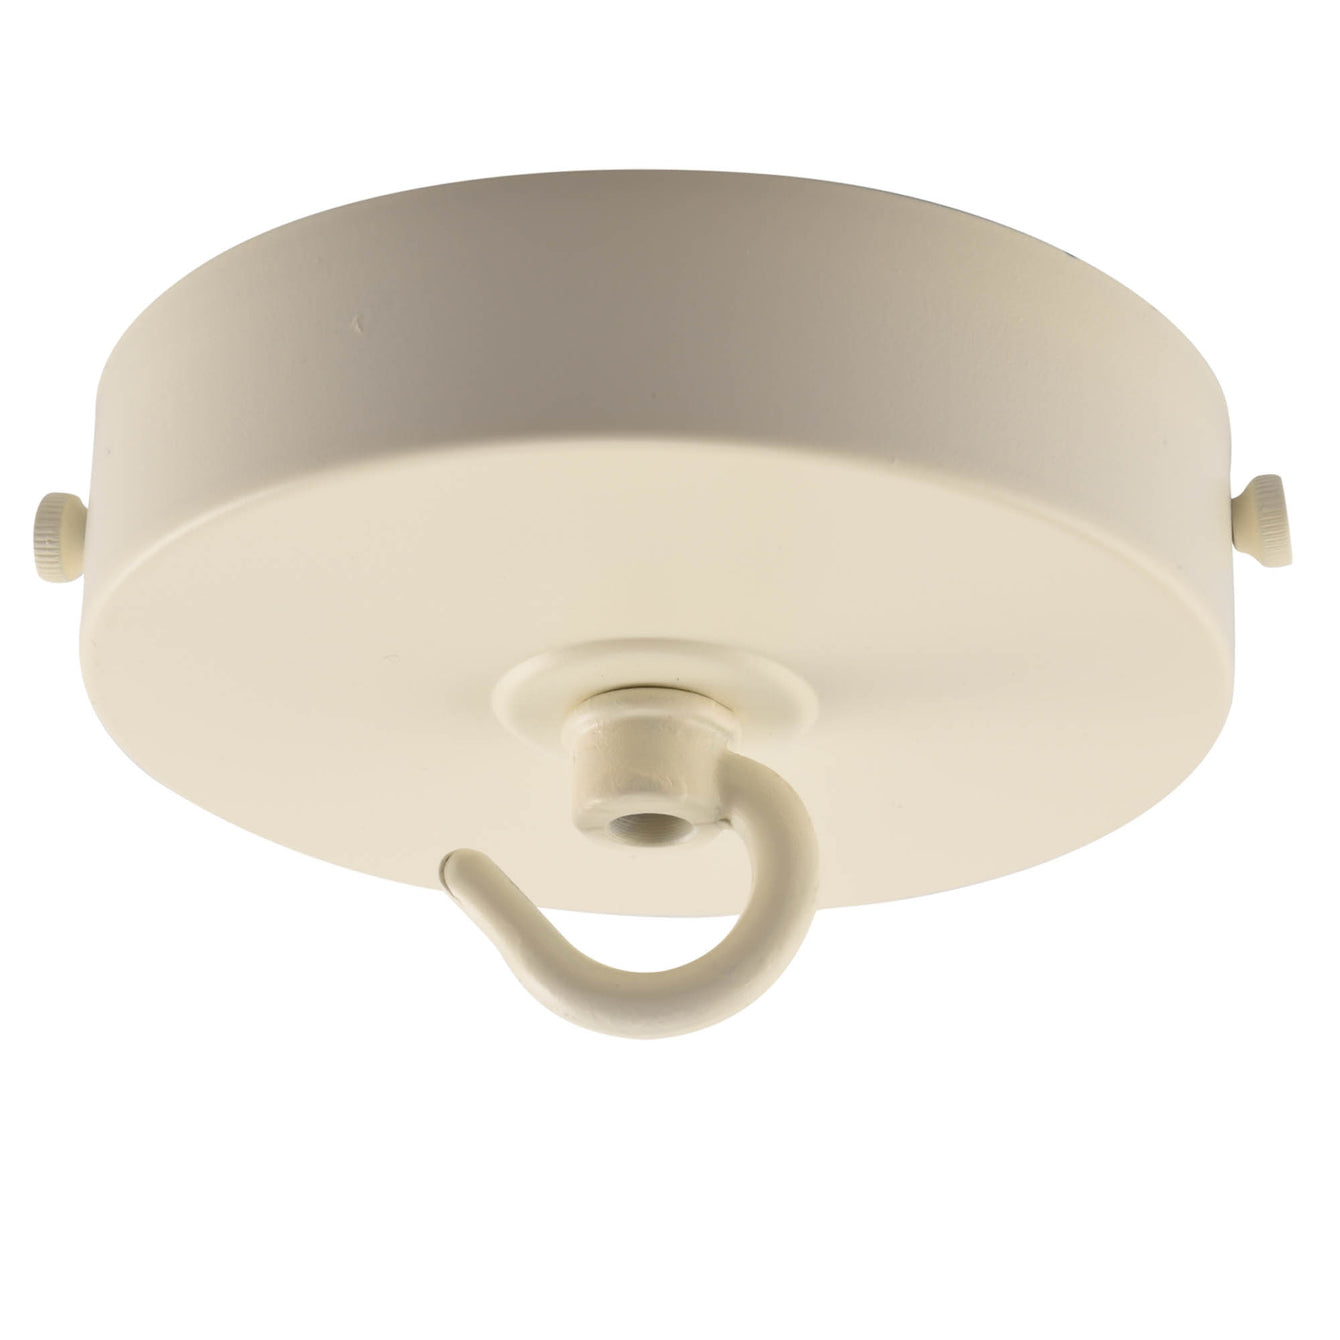 ElekTek 100mm Diameter Flat Top Ceiling Rose with Strap Bracket and Hook Metallic Finishes Powder Coated Colours - Buy It Better 